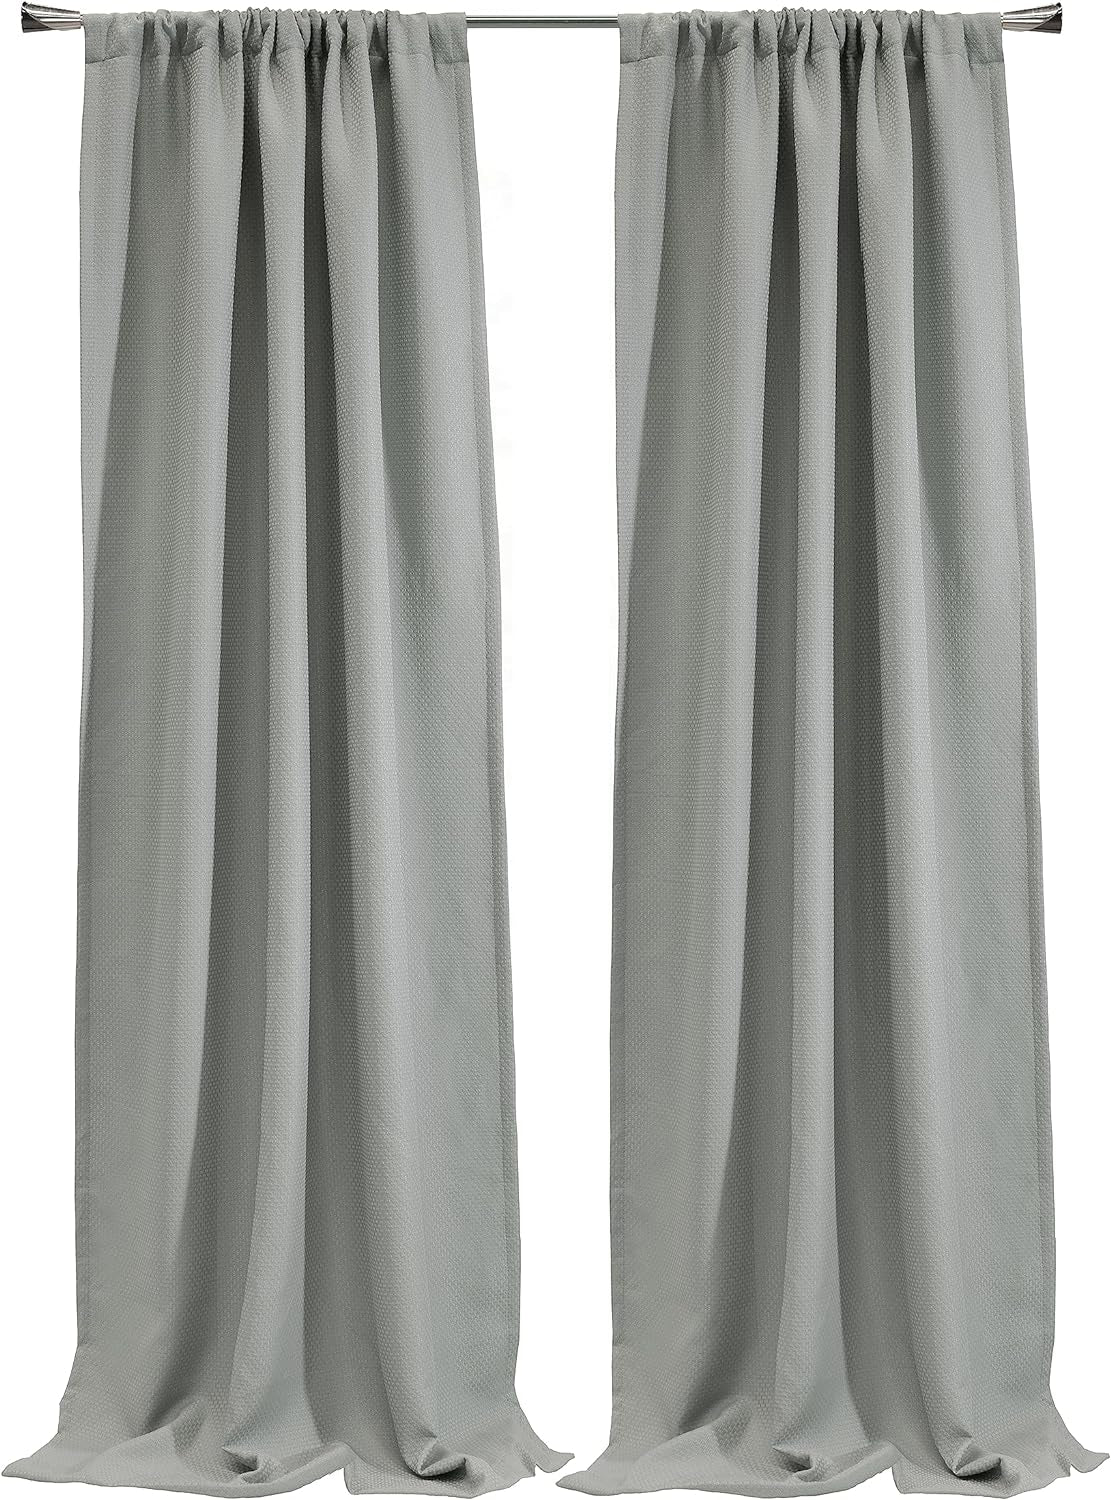 Thermalogic Birmingham Room Darkening Dual Header Curtain Panel 52 X 95 in Silver  Commonwealth Home Fashions   